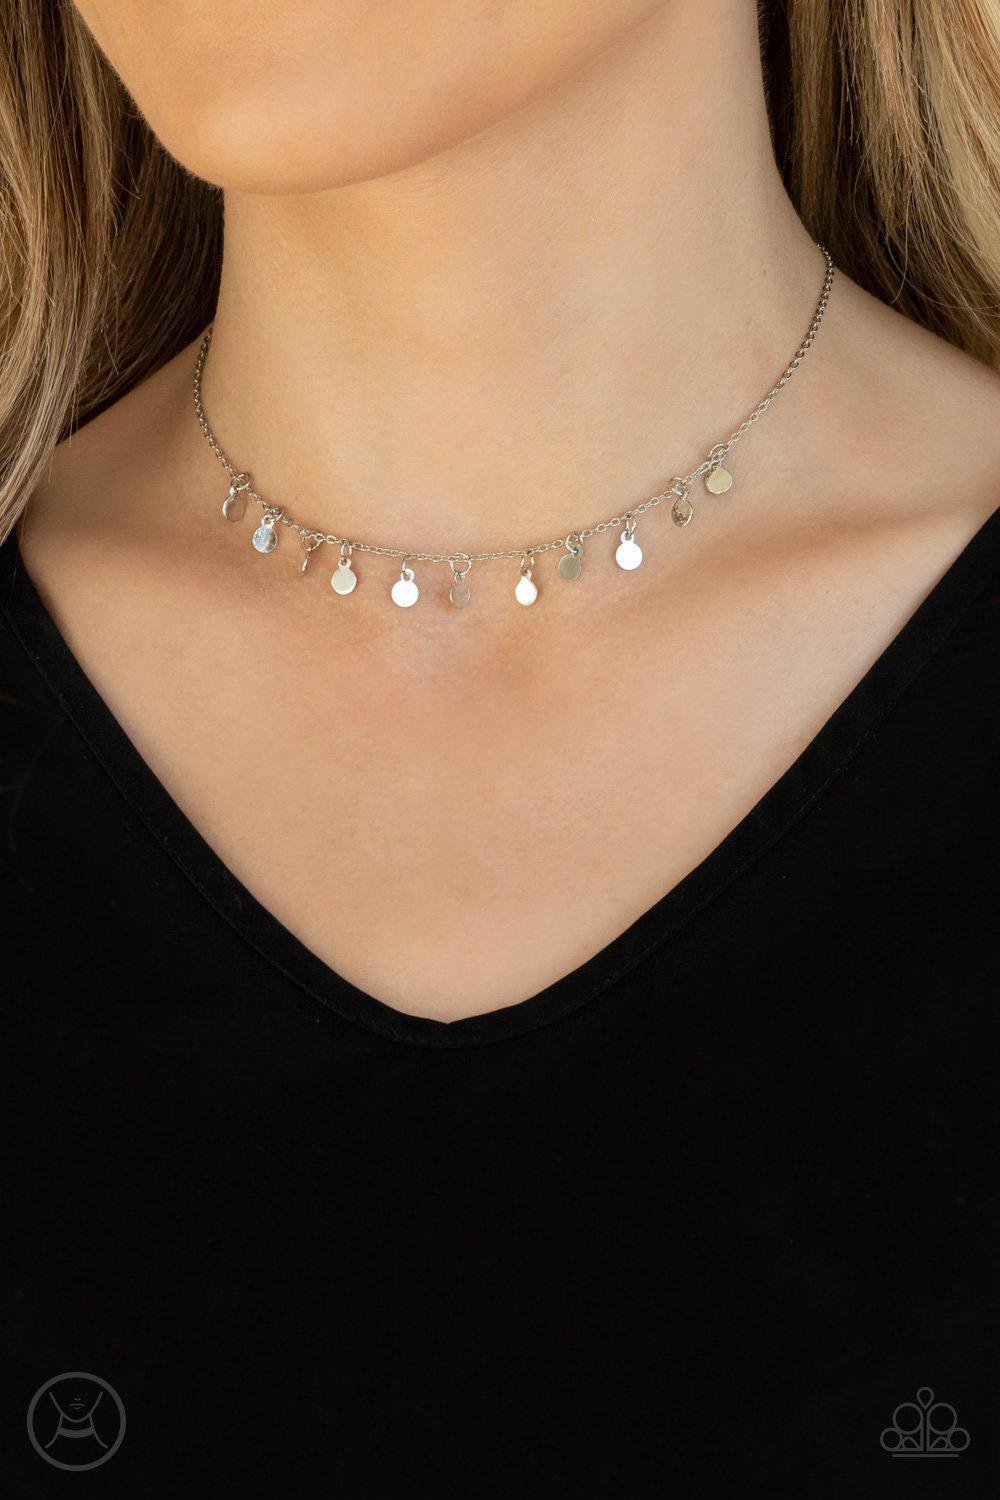 Ready, Set, DISCO! Silver Choker Necklace - Paparazzi Accessories- model - CarasShop.com - $5 Jewelry by Cara Jewels